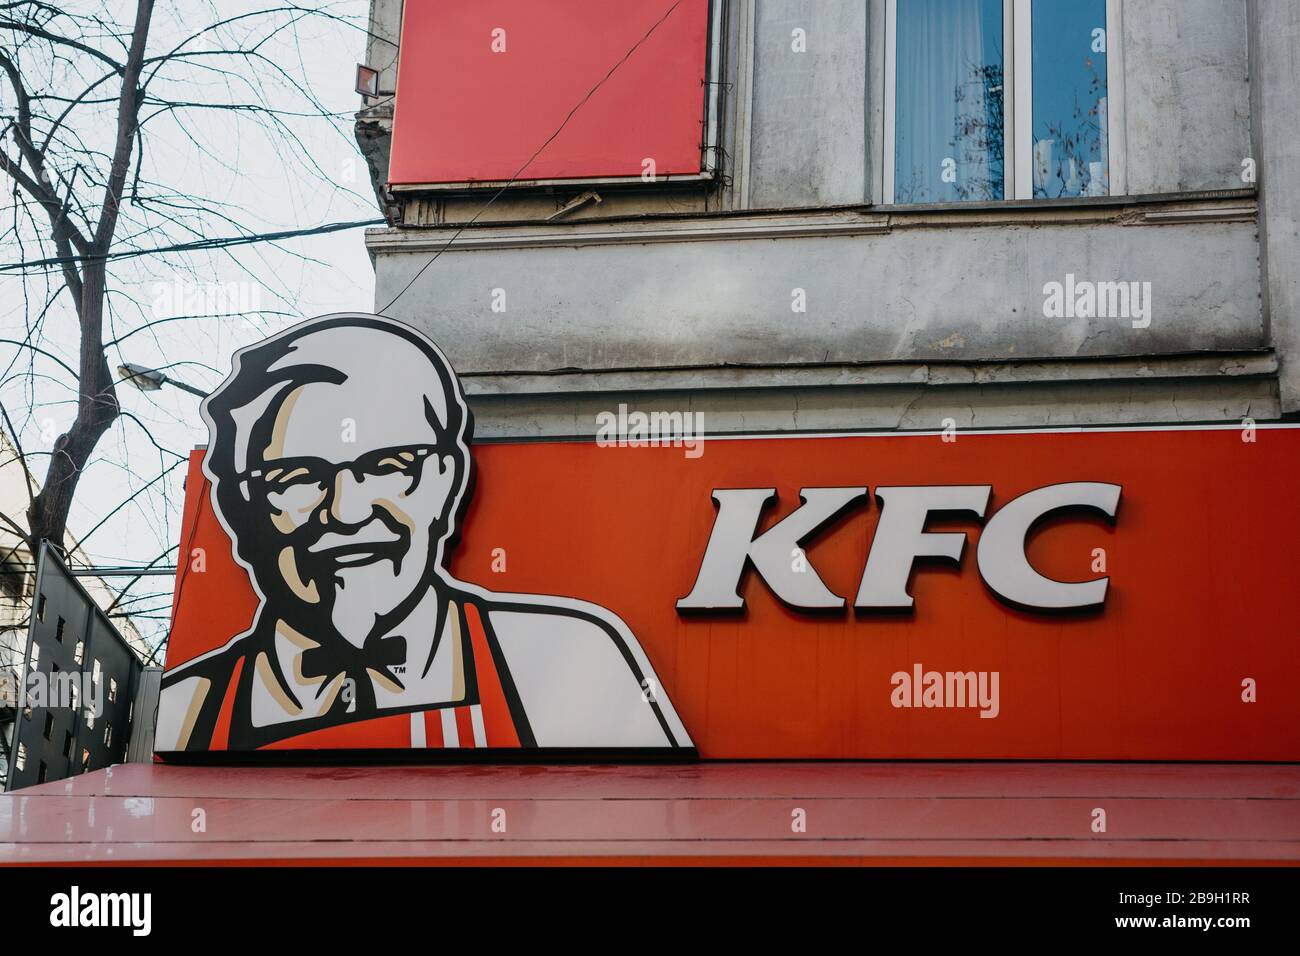 Georgia, Tbilisi, February 25, 2020: KFC sign at the entrance to a fast food restaurant - Kentucky fried chicken. Stock Photo